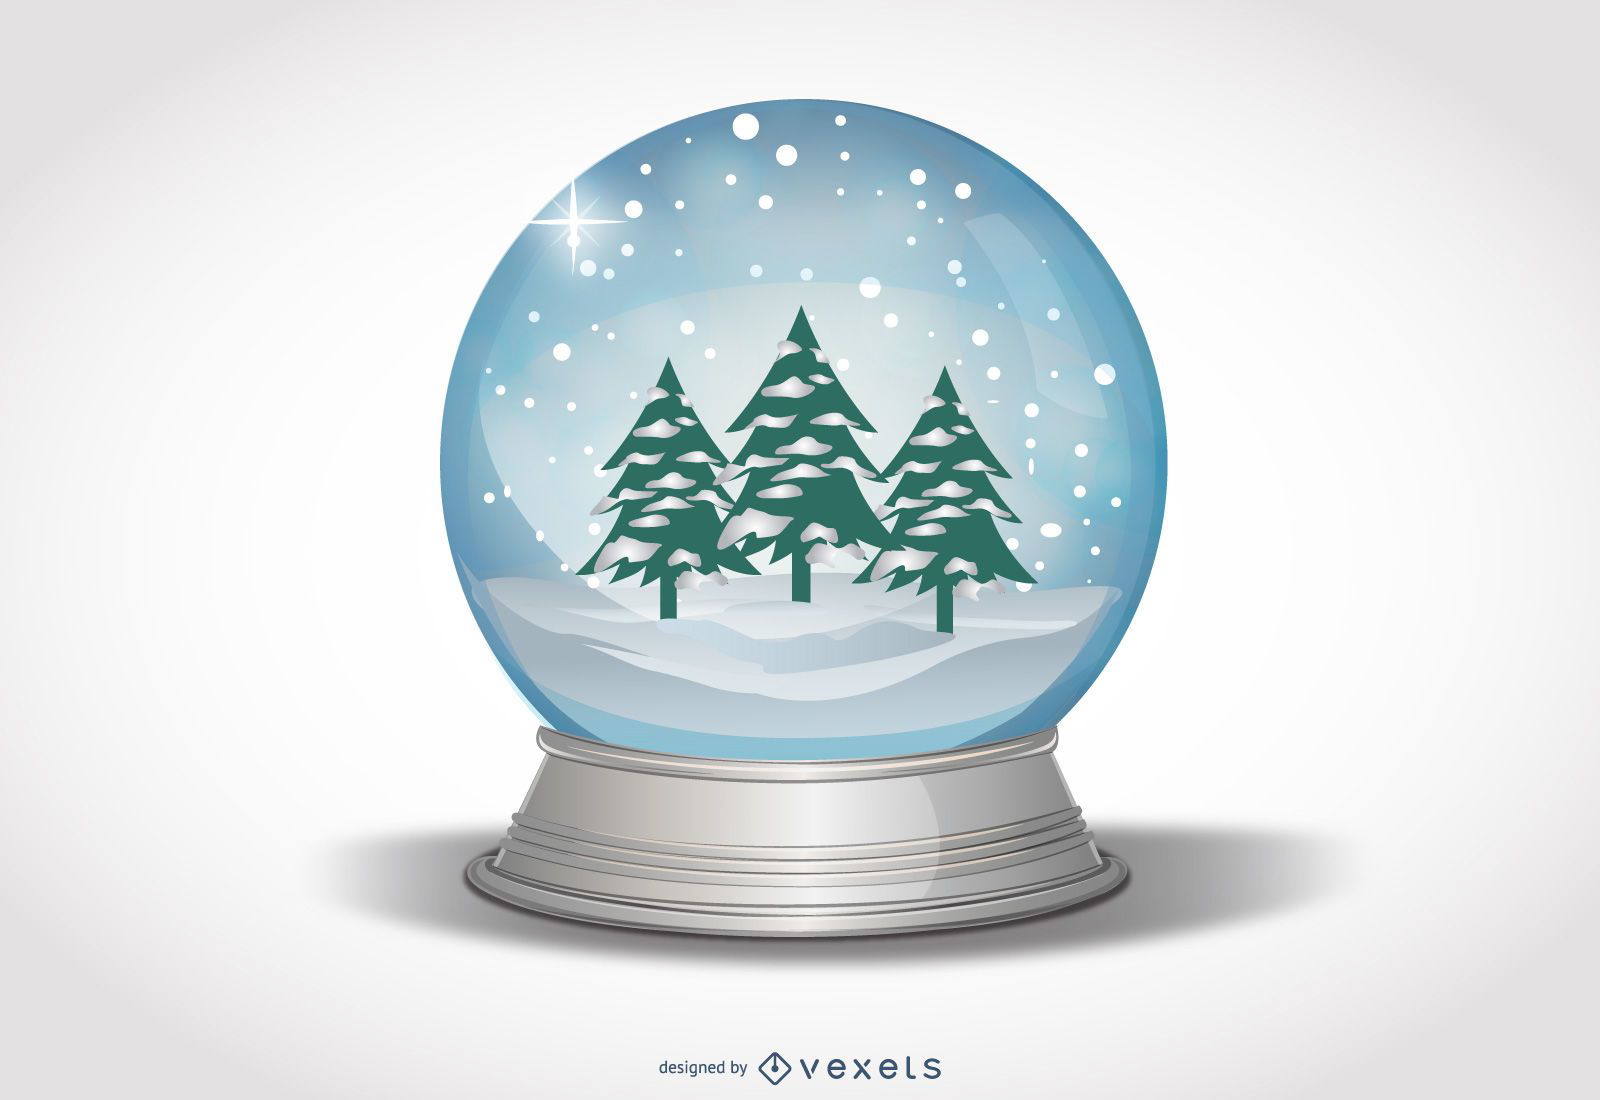 Download Snow Globe With Xmas Trees & Snowy Landscape - Vector Download